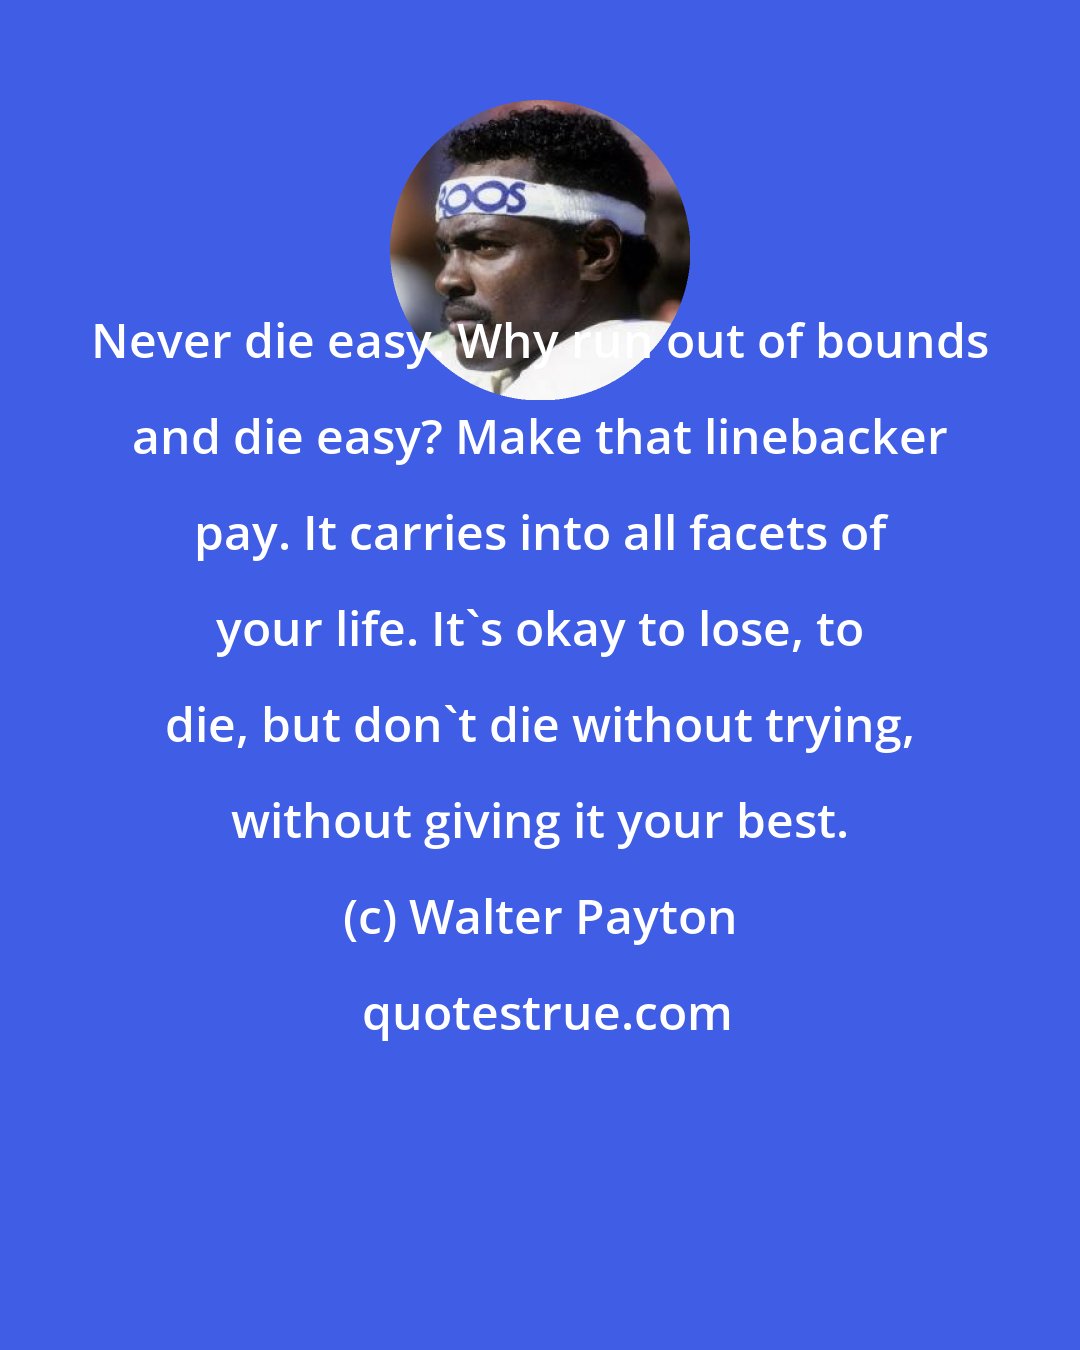 Walter Payton: Never die easy. Why run out of bounds and die easy? Make that linebacker pay. It carries into all facets of your life. It's okay to lose, to die, but don't die without trying, without giving it your best.